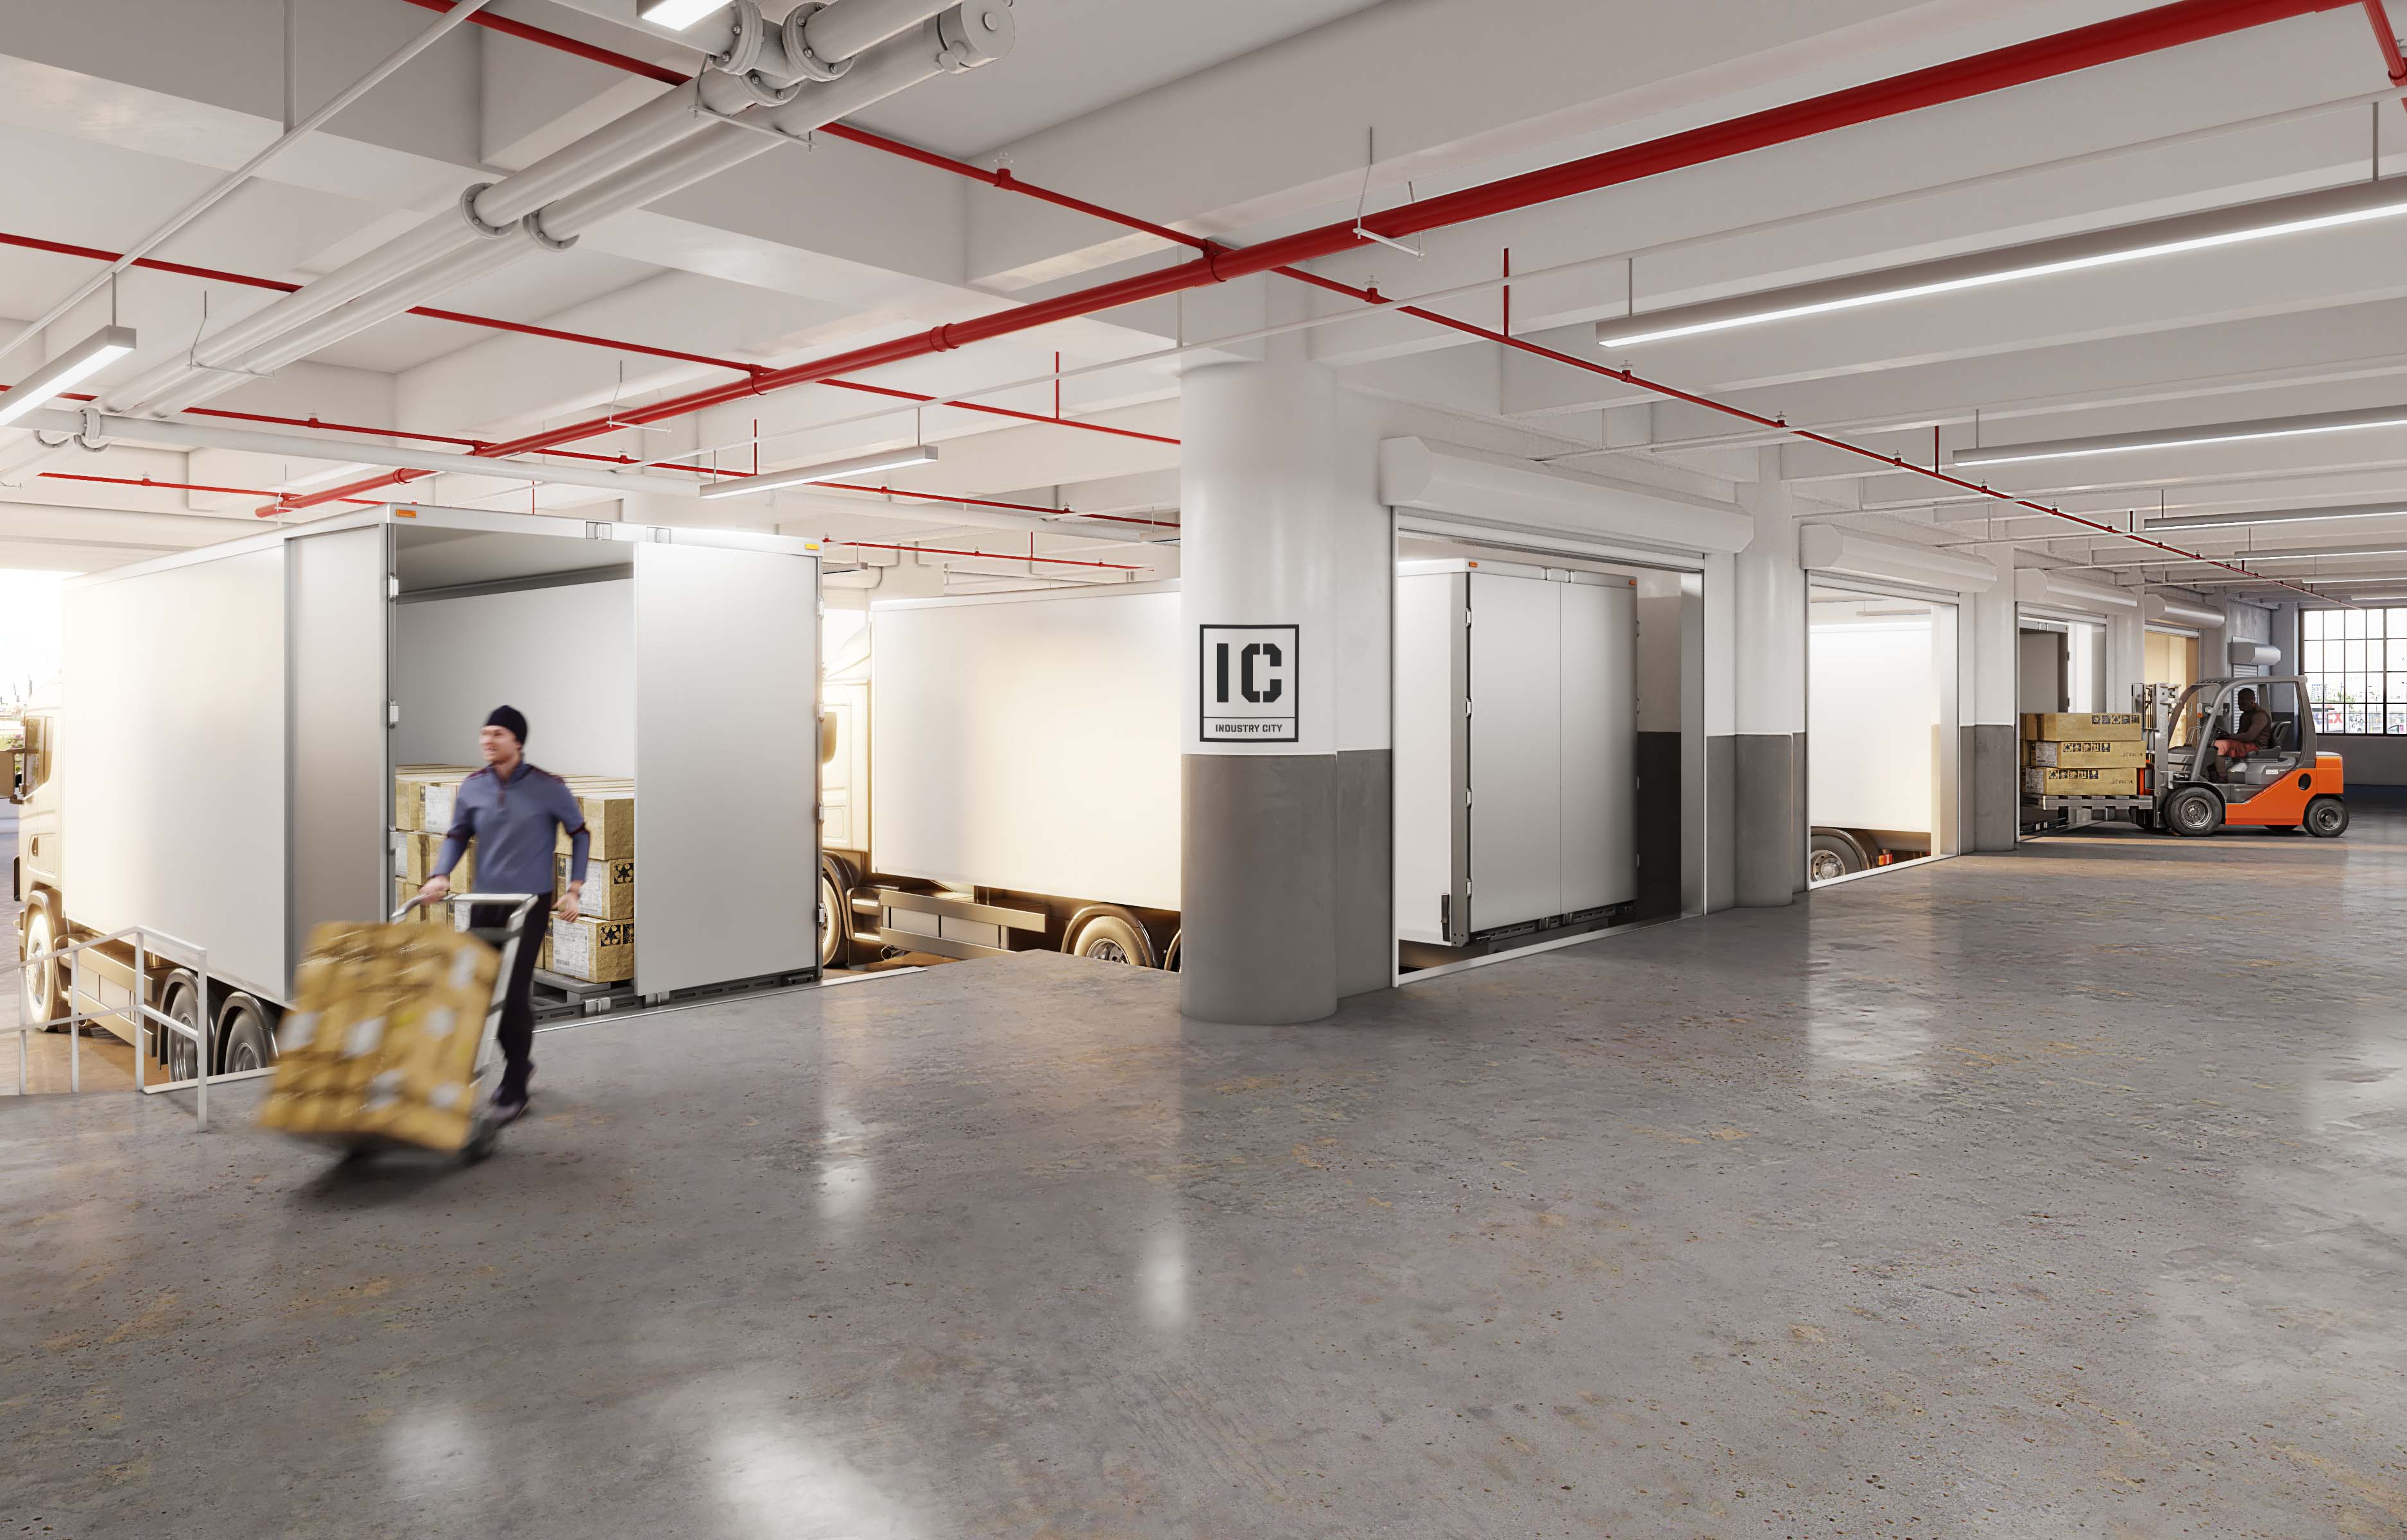 Loading dock v150 How Industry City Provides Space For Companies To Continuously Evolve